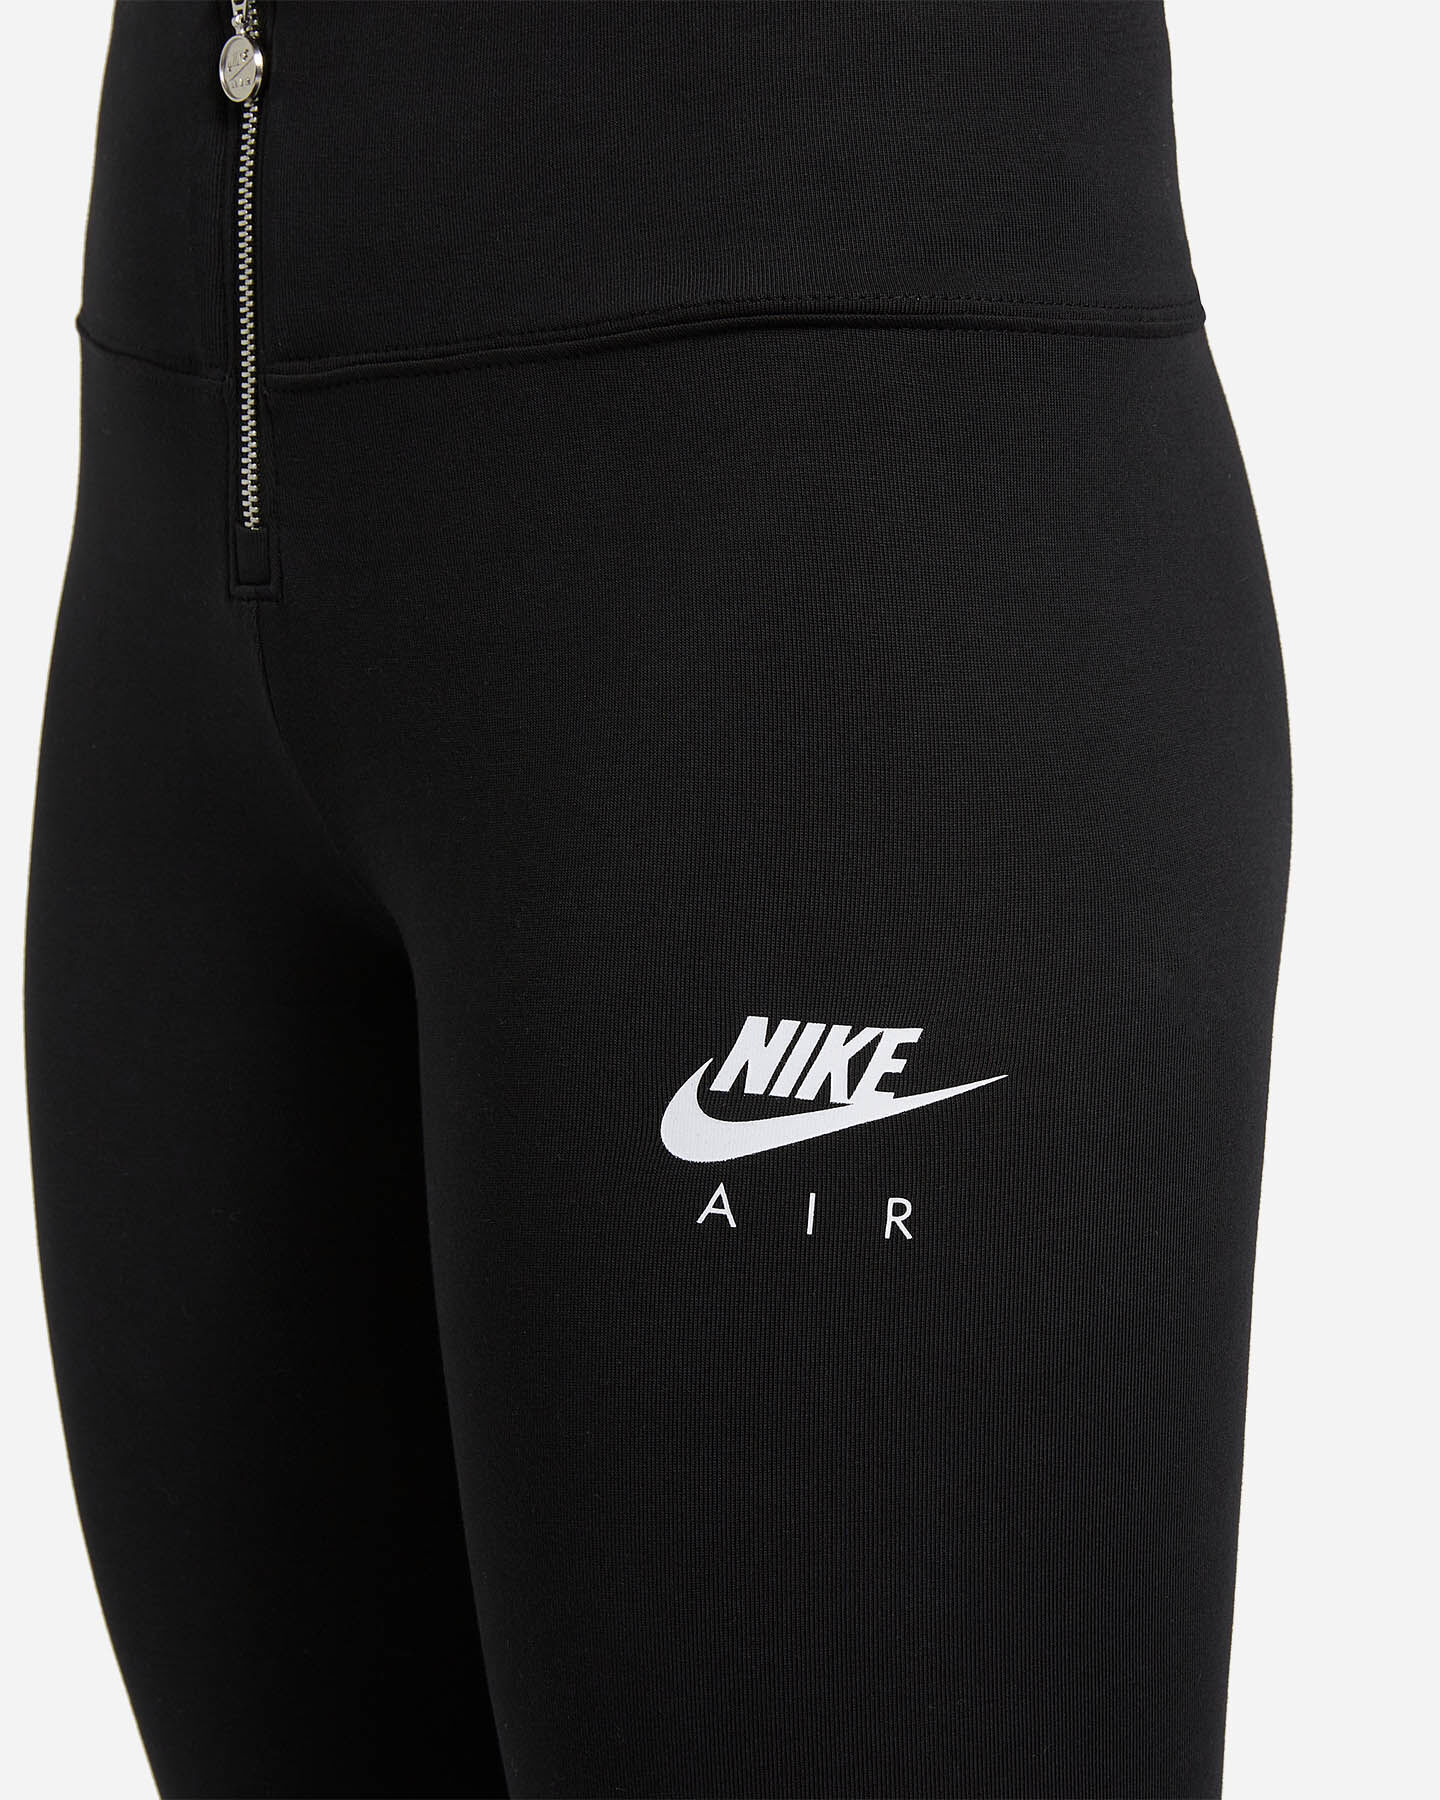  Leggings NIKE AIR JSTRETCH W S5164670|010|XS scatto 3